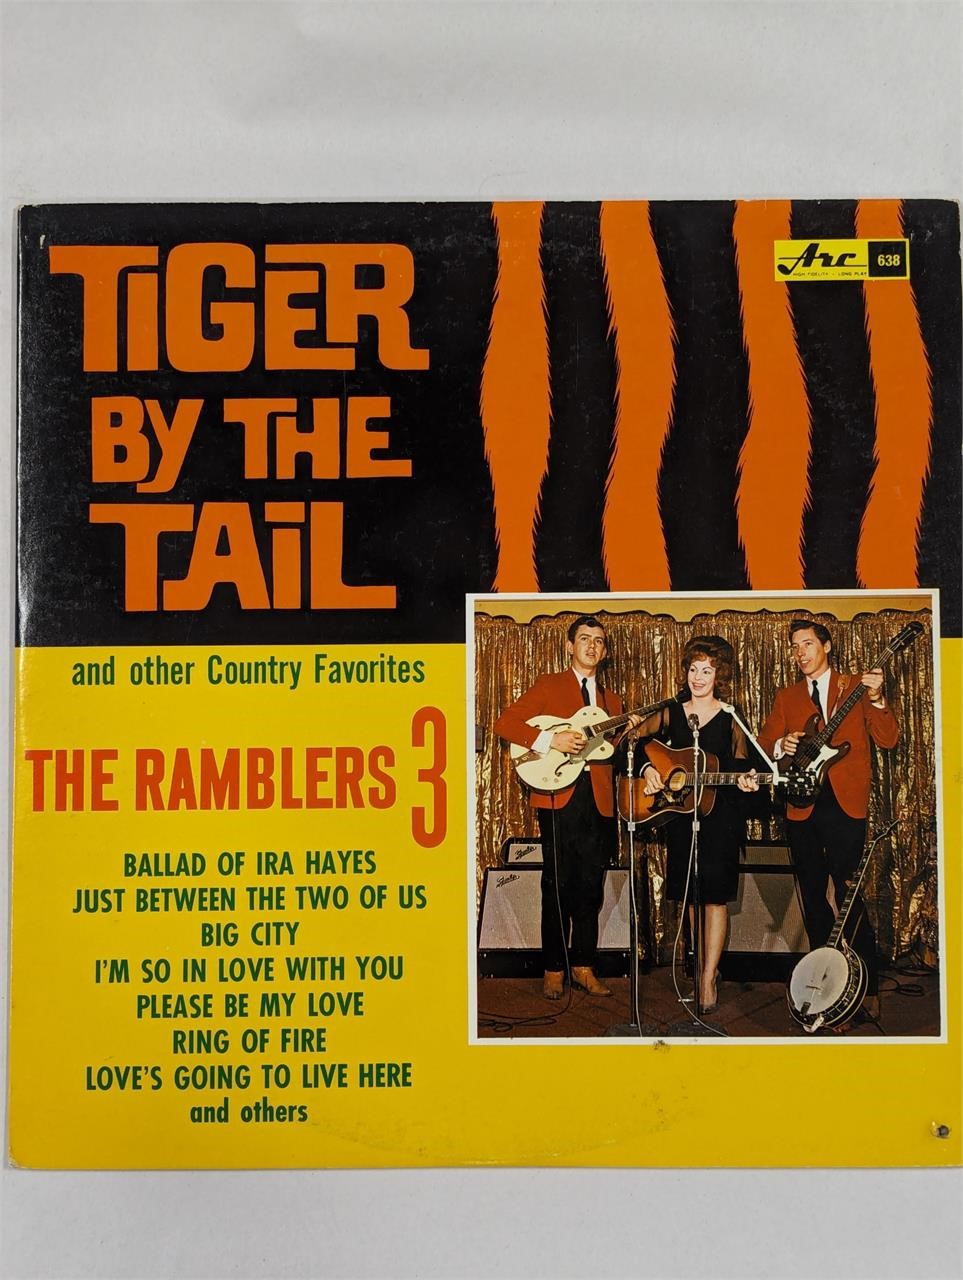 The Ramblers 3 - Tiger by the Tail